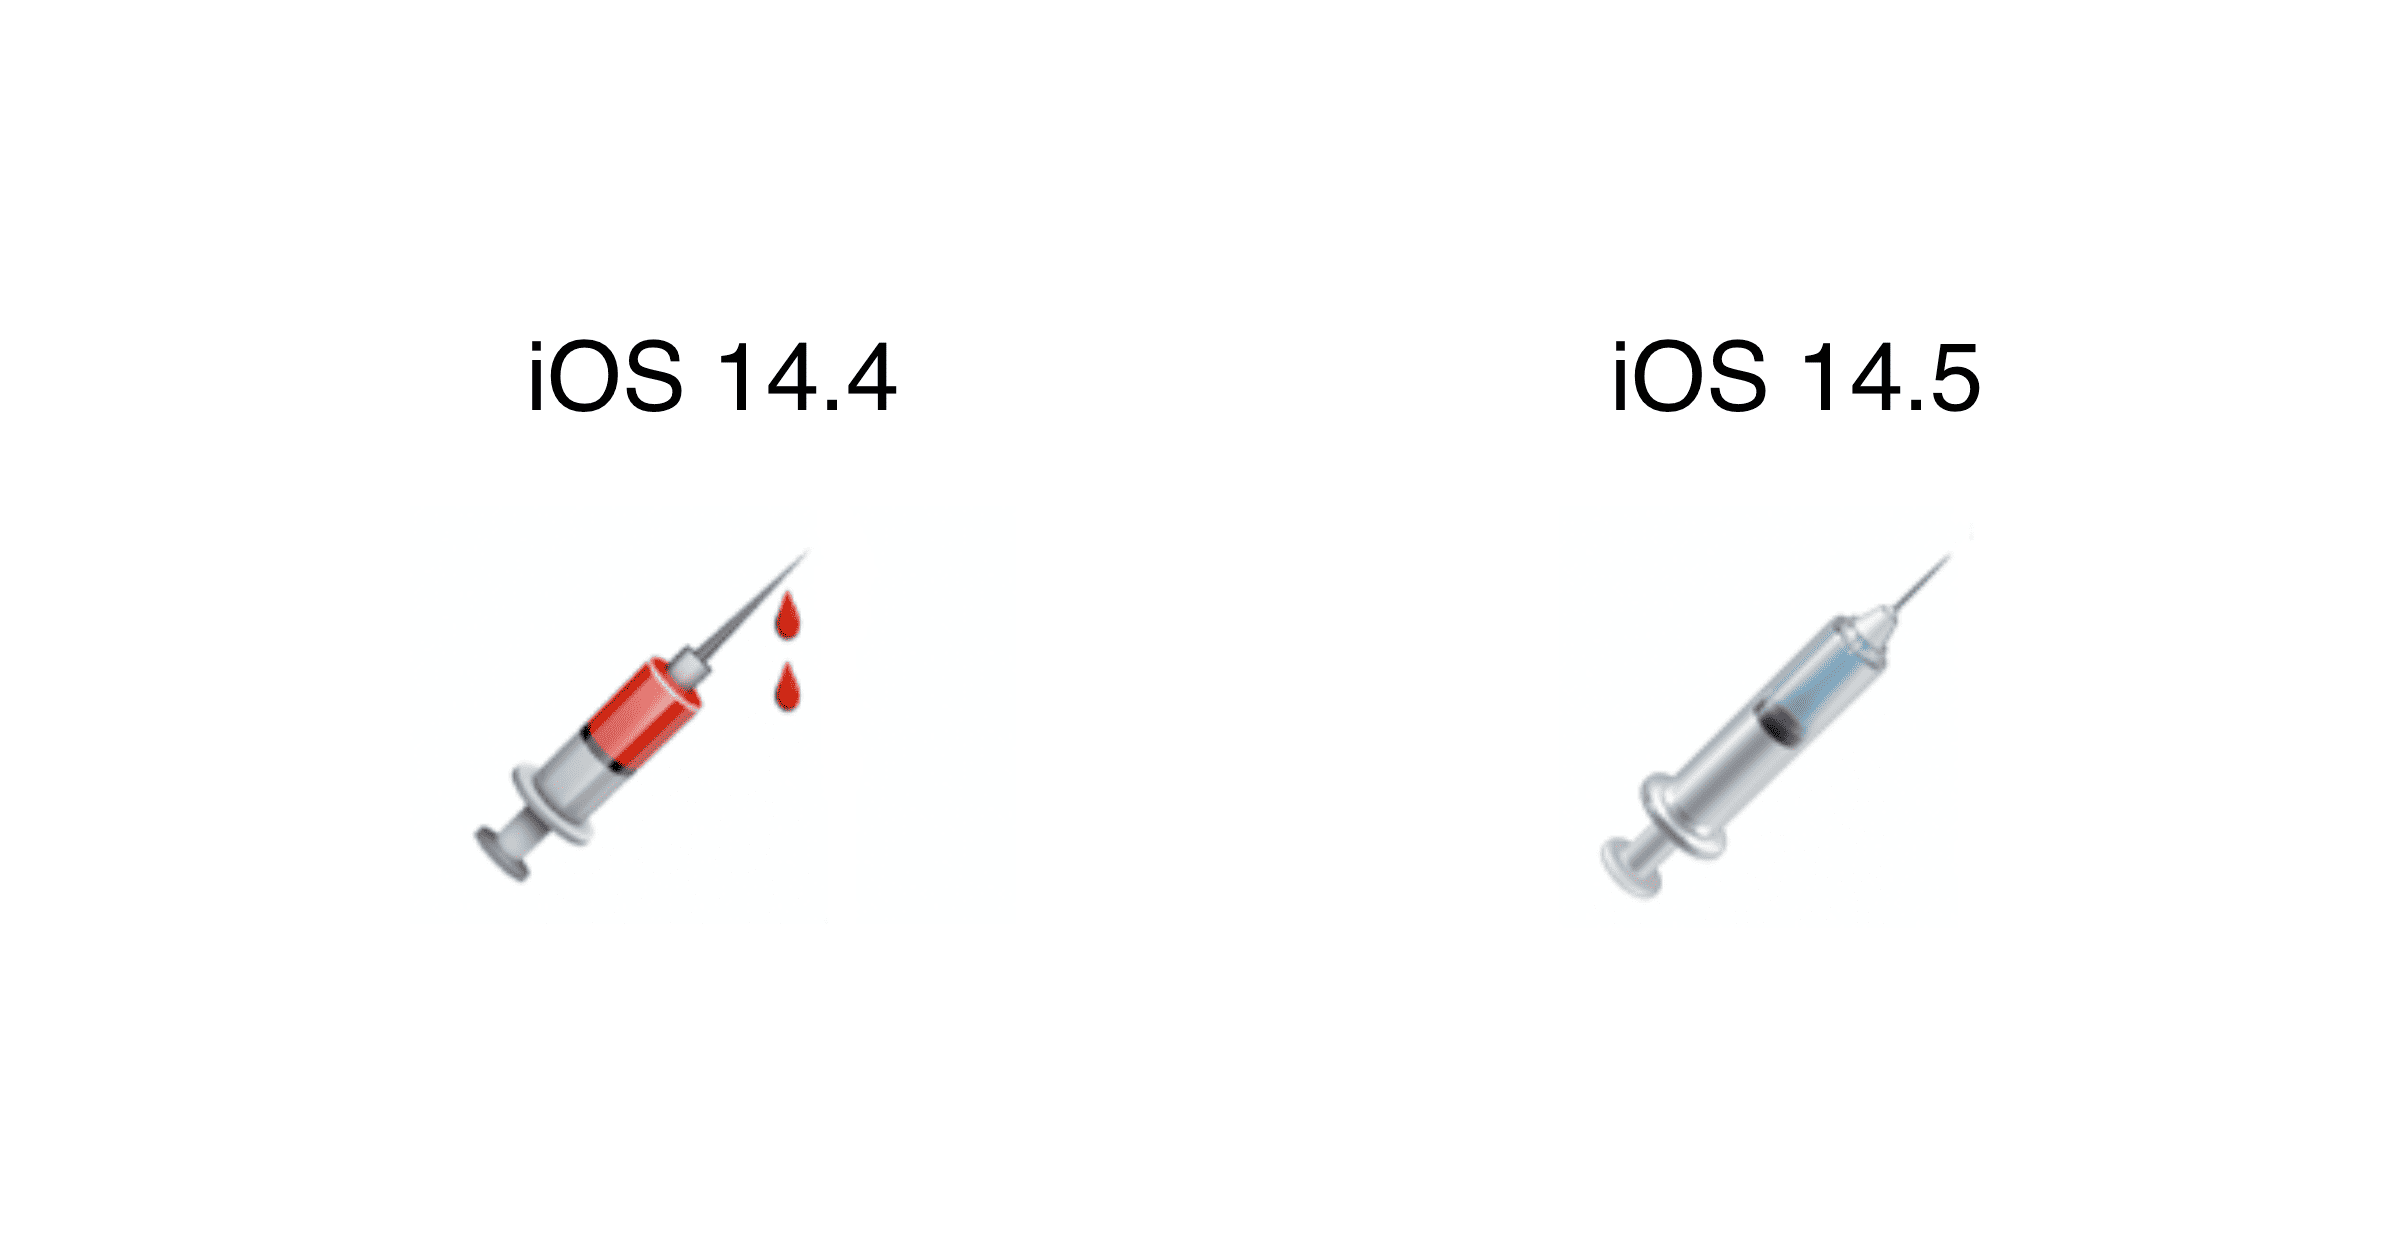 New Emoji Coming to iOS 14.5, Including Updated Syringe to Coincide With COVID-19 Vaccine Rollout